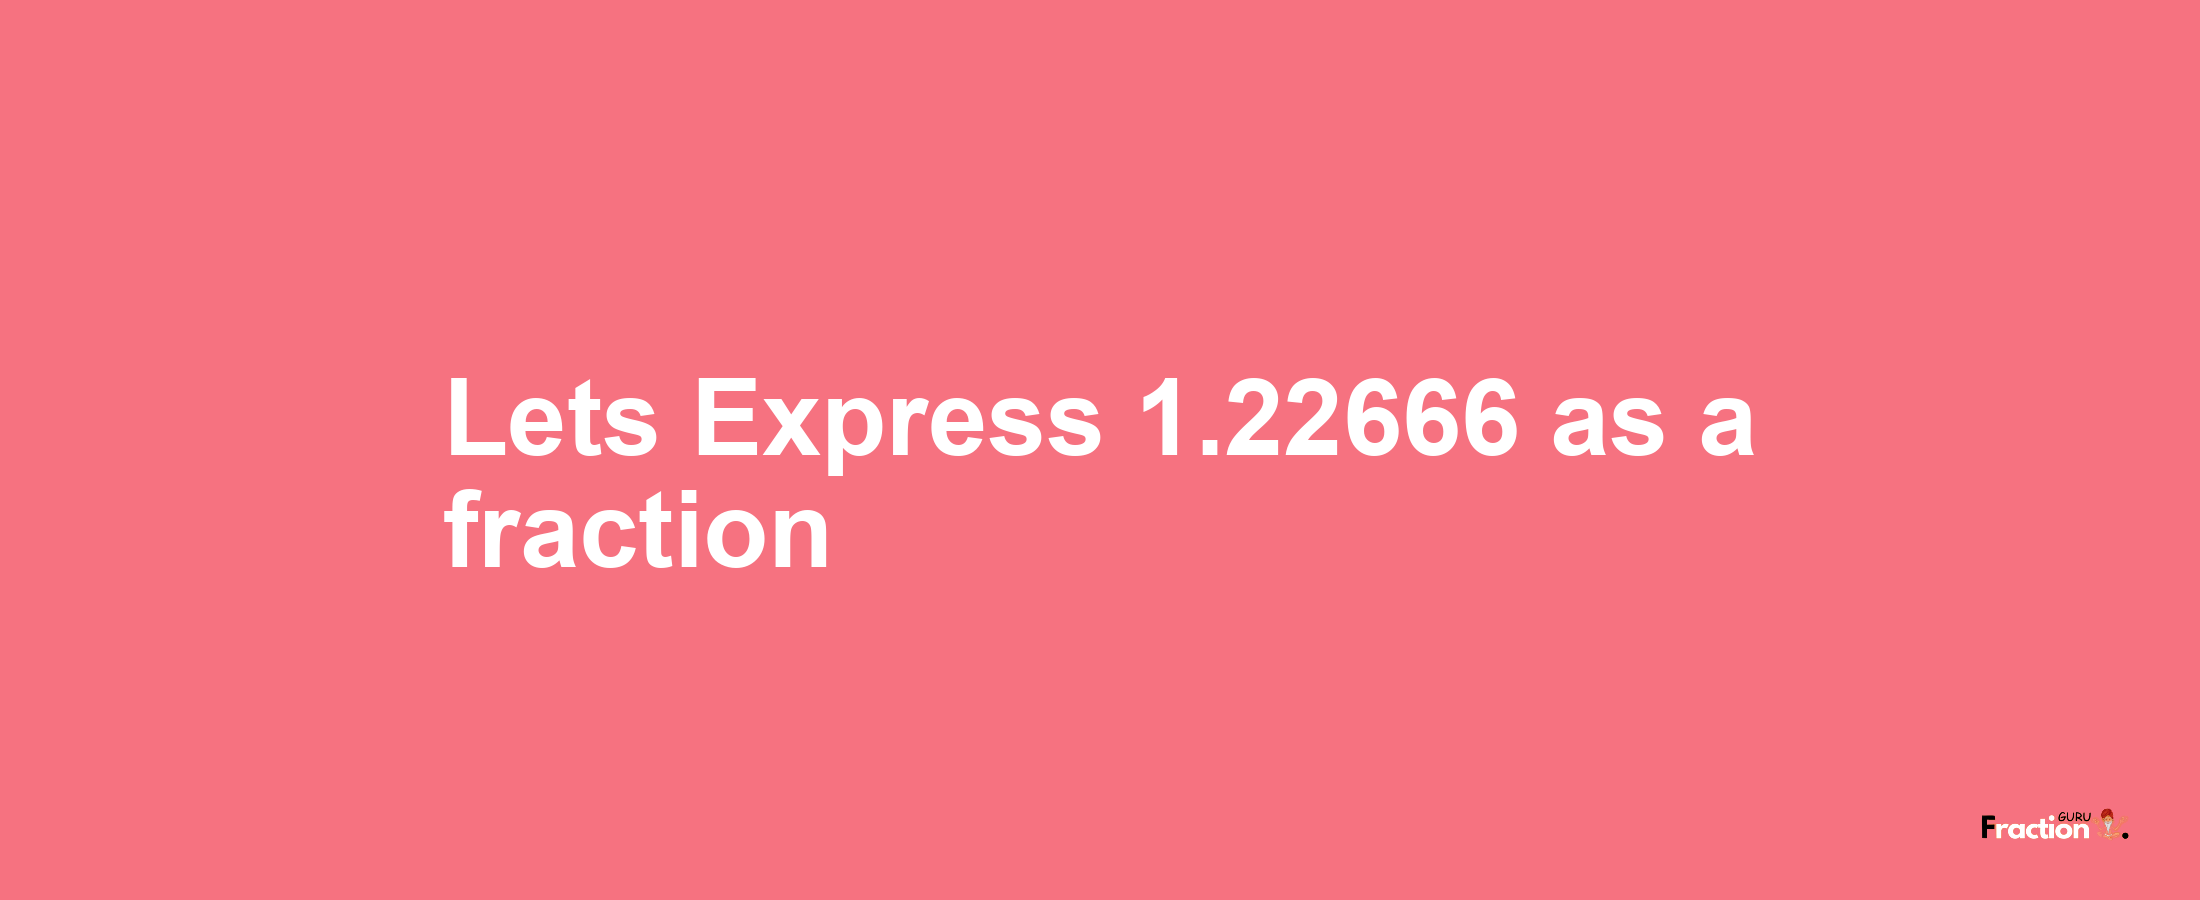 Lets Express 1.22666 as afraction